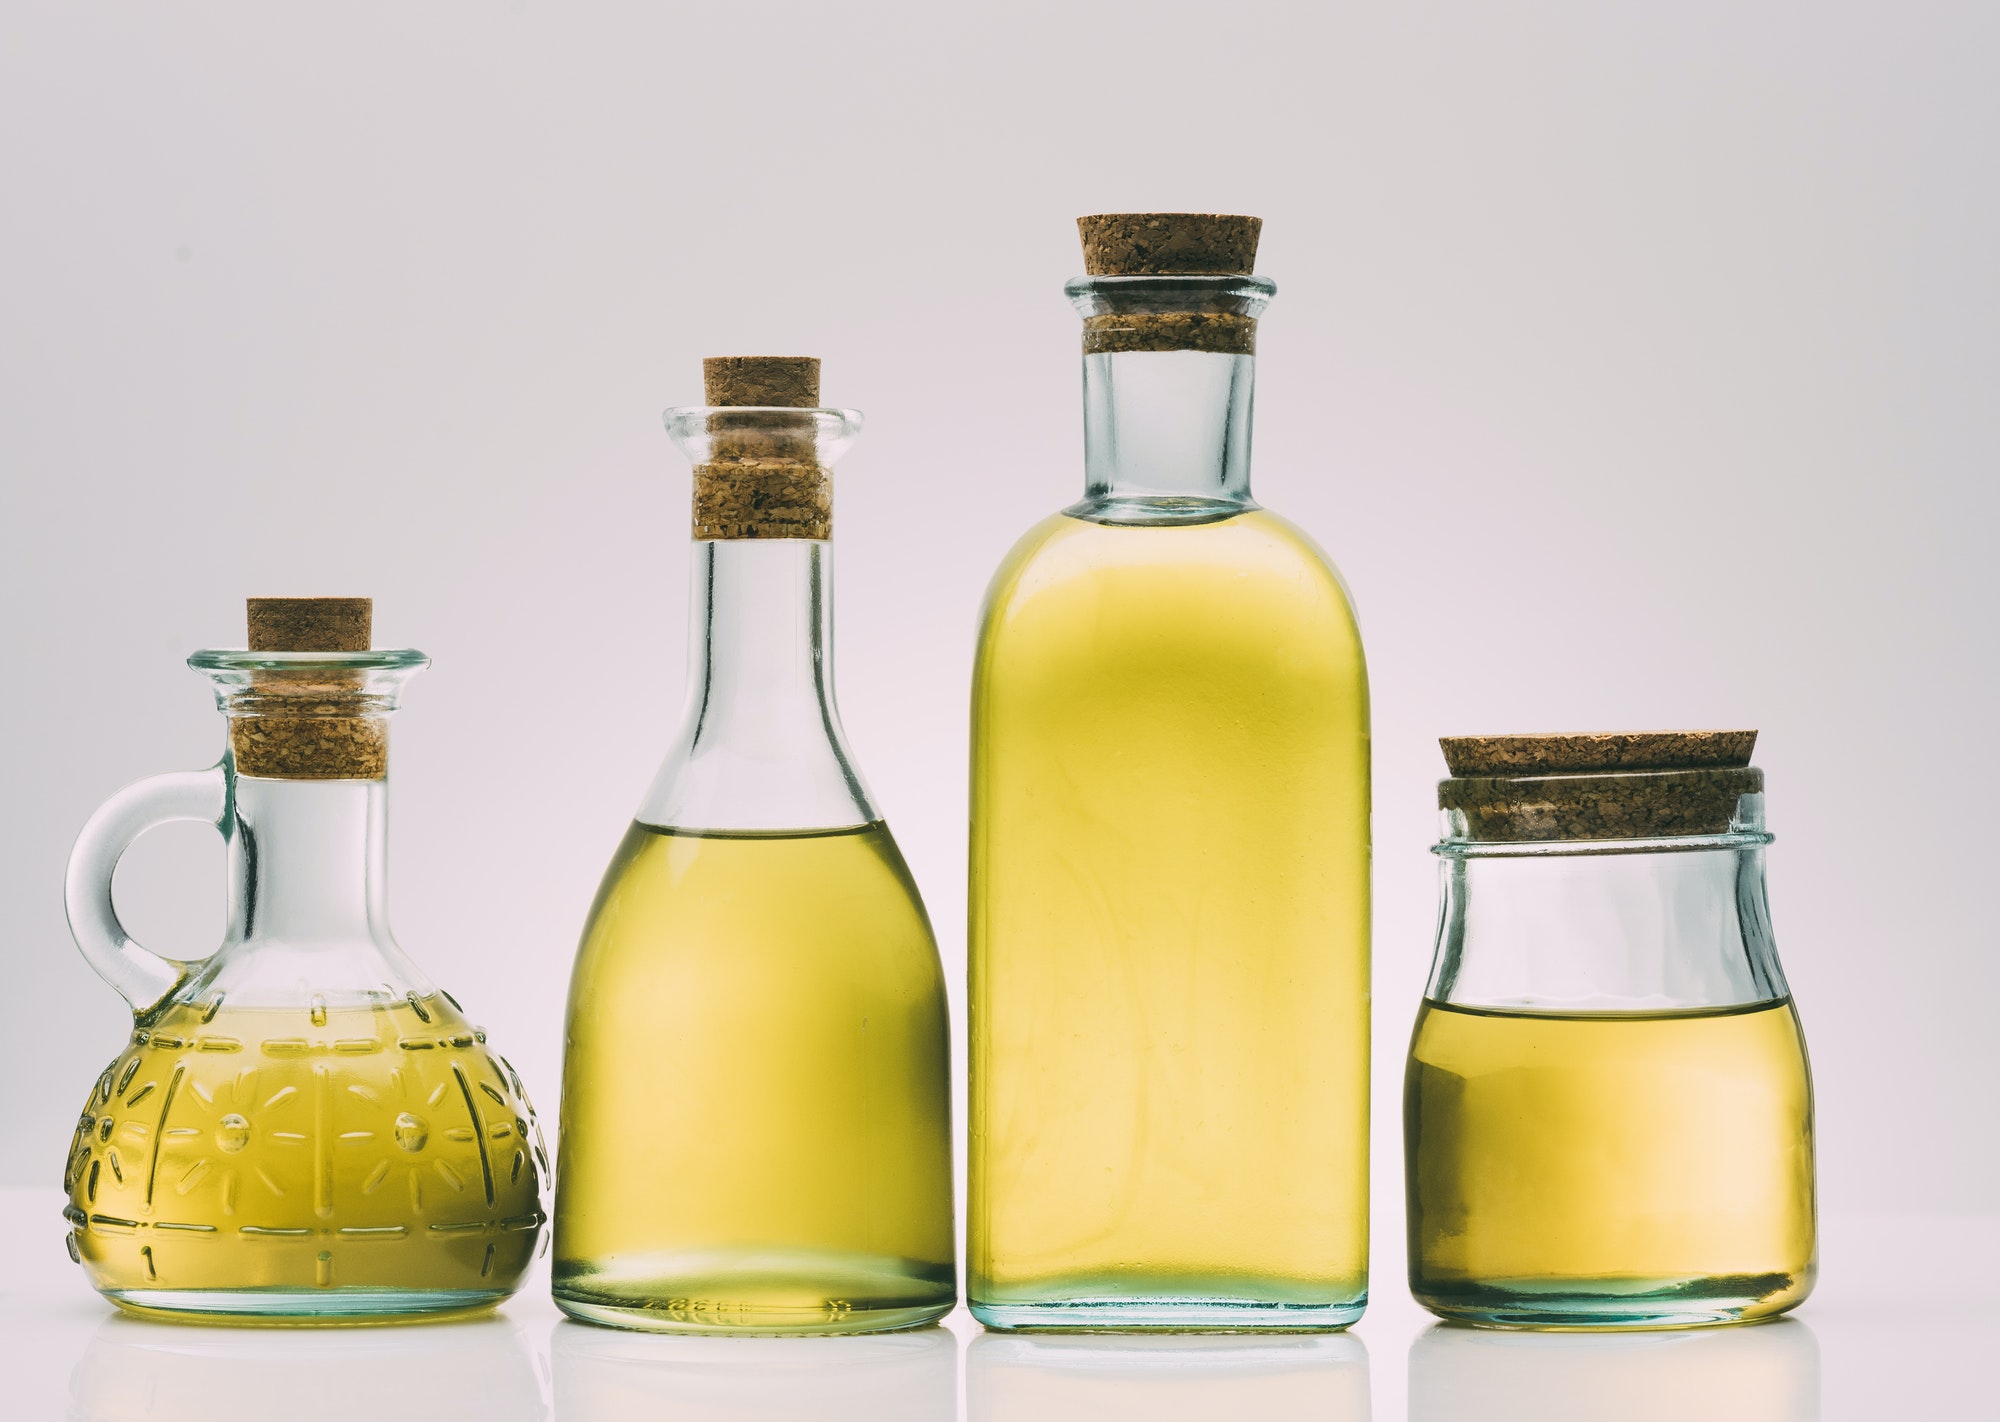 Coconut Oil Vs Olive Oil For Hair: Which Should You Use?